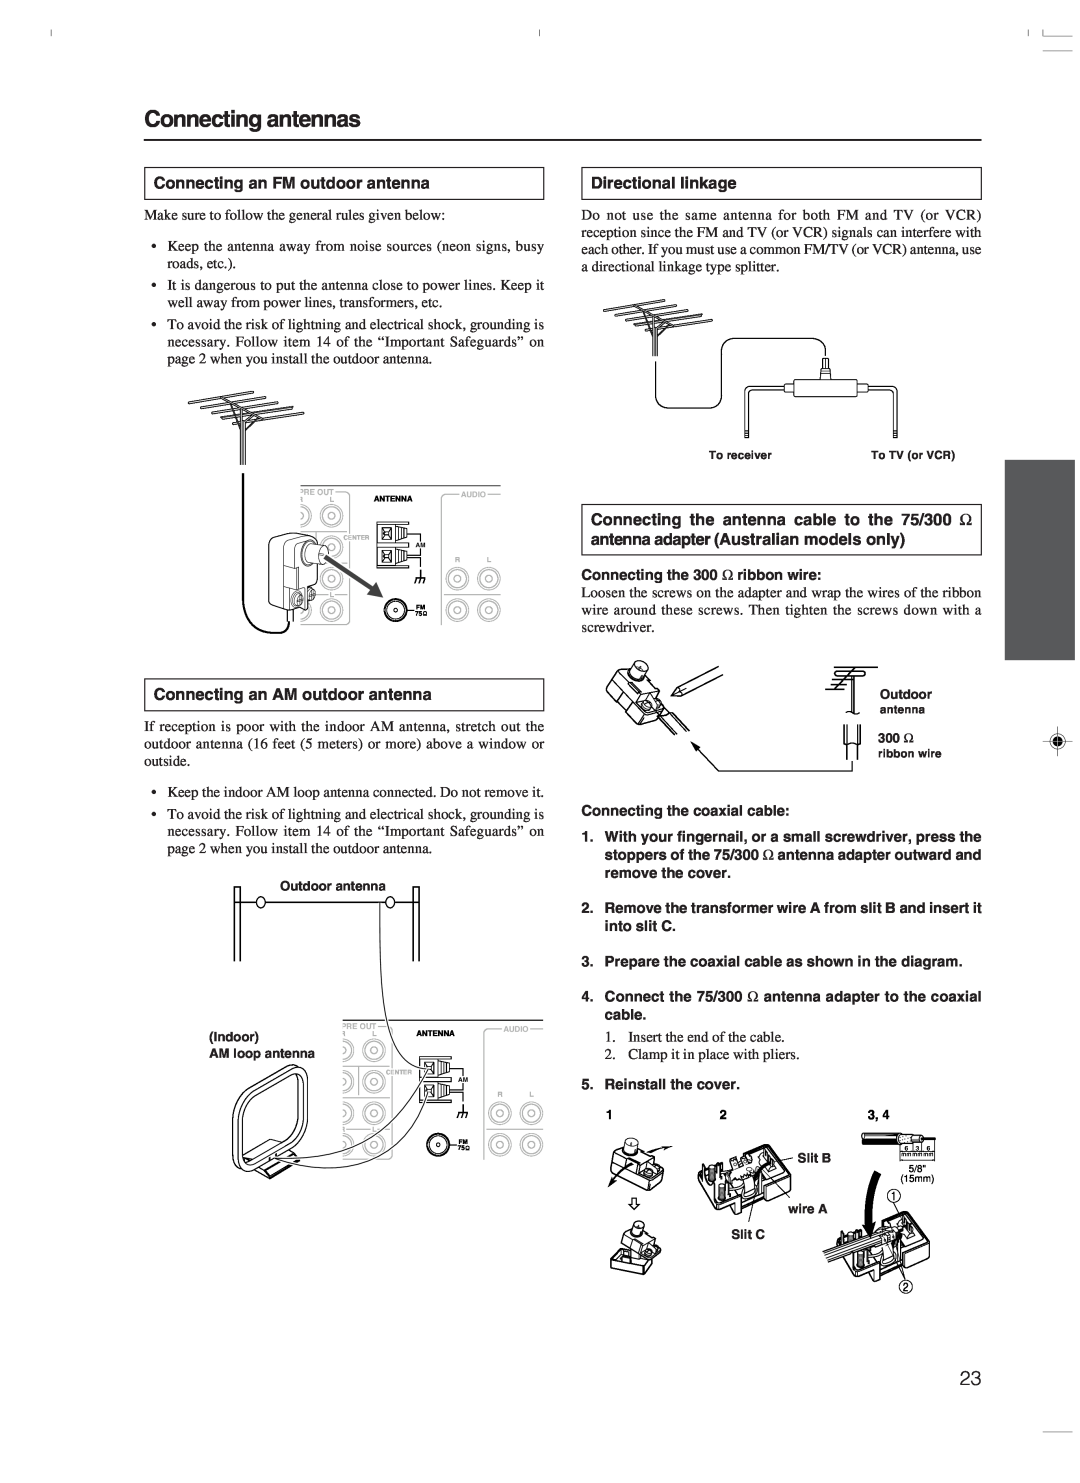 Integra DTR-7.3 instruction manual Connecting antennas, Connecting an FM outdoor antenna, Directional linkage 